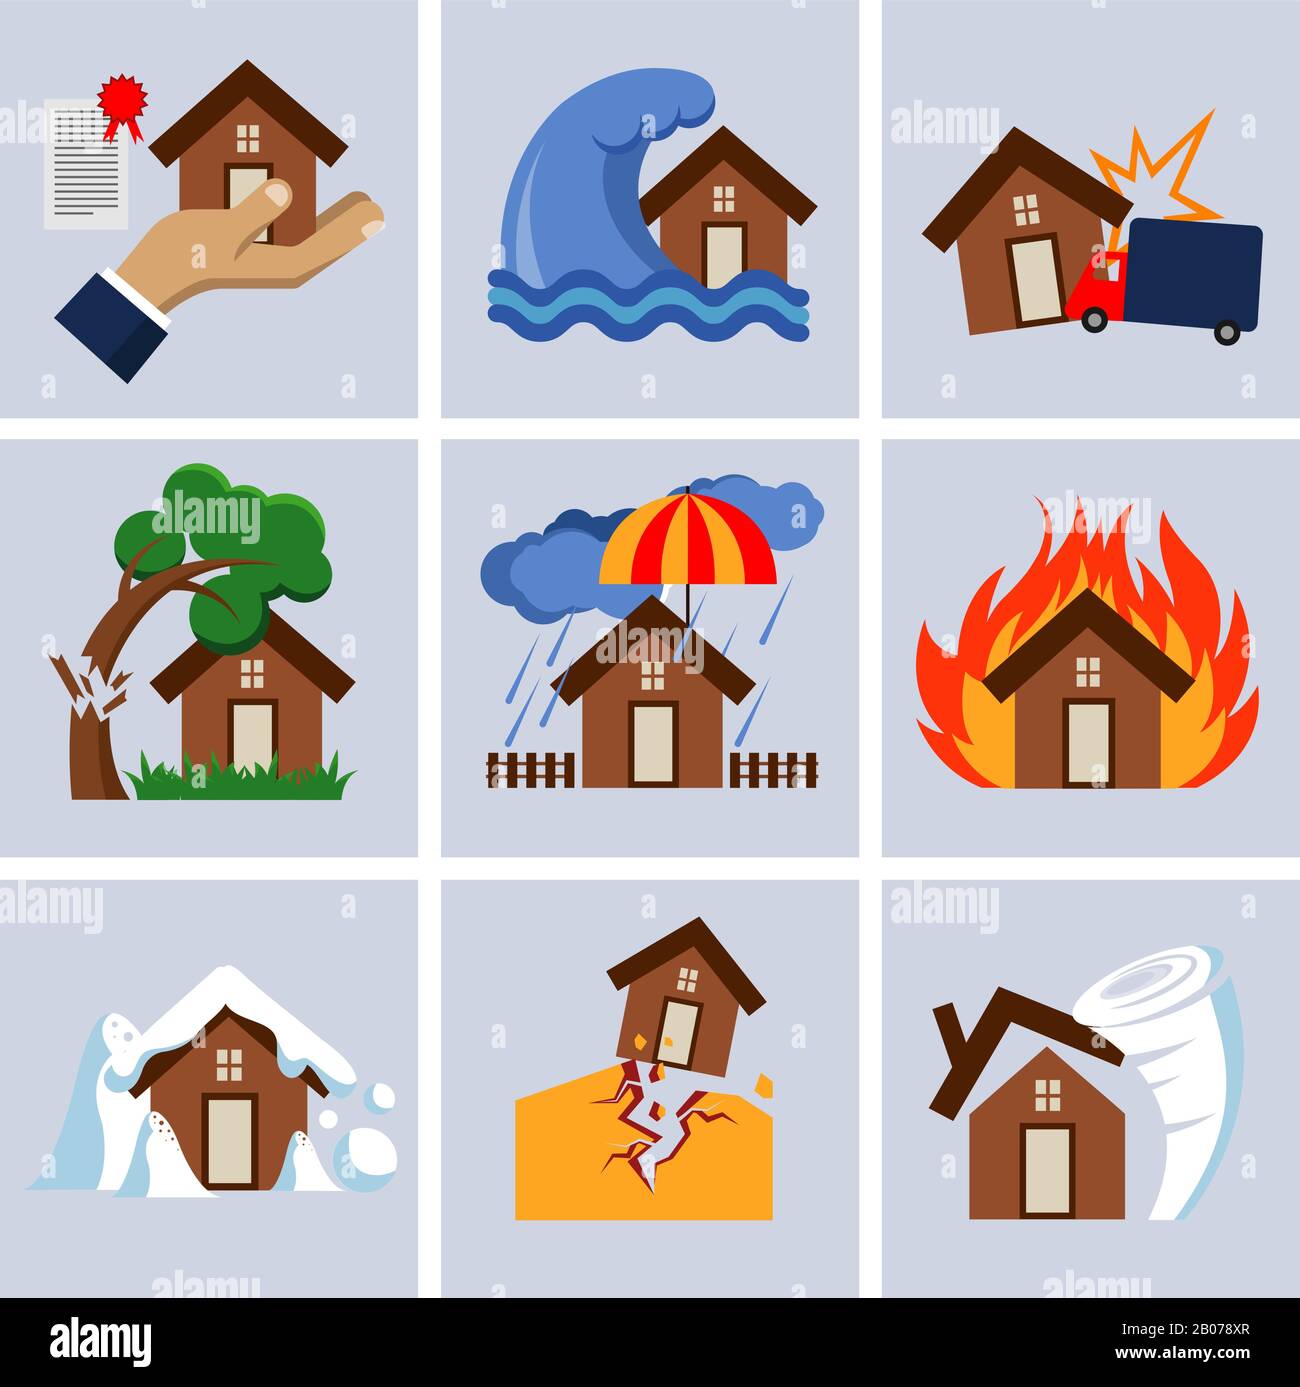 Natural disaster insurance, house insurance business service vector icons. Flood and fallen tree on roof illustration Stock Vector